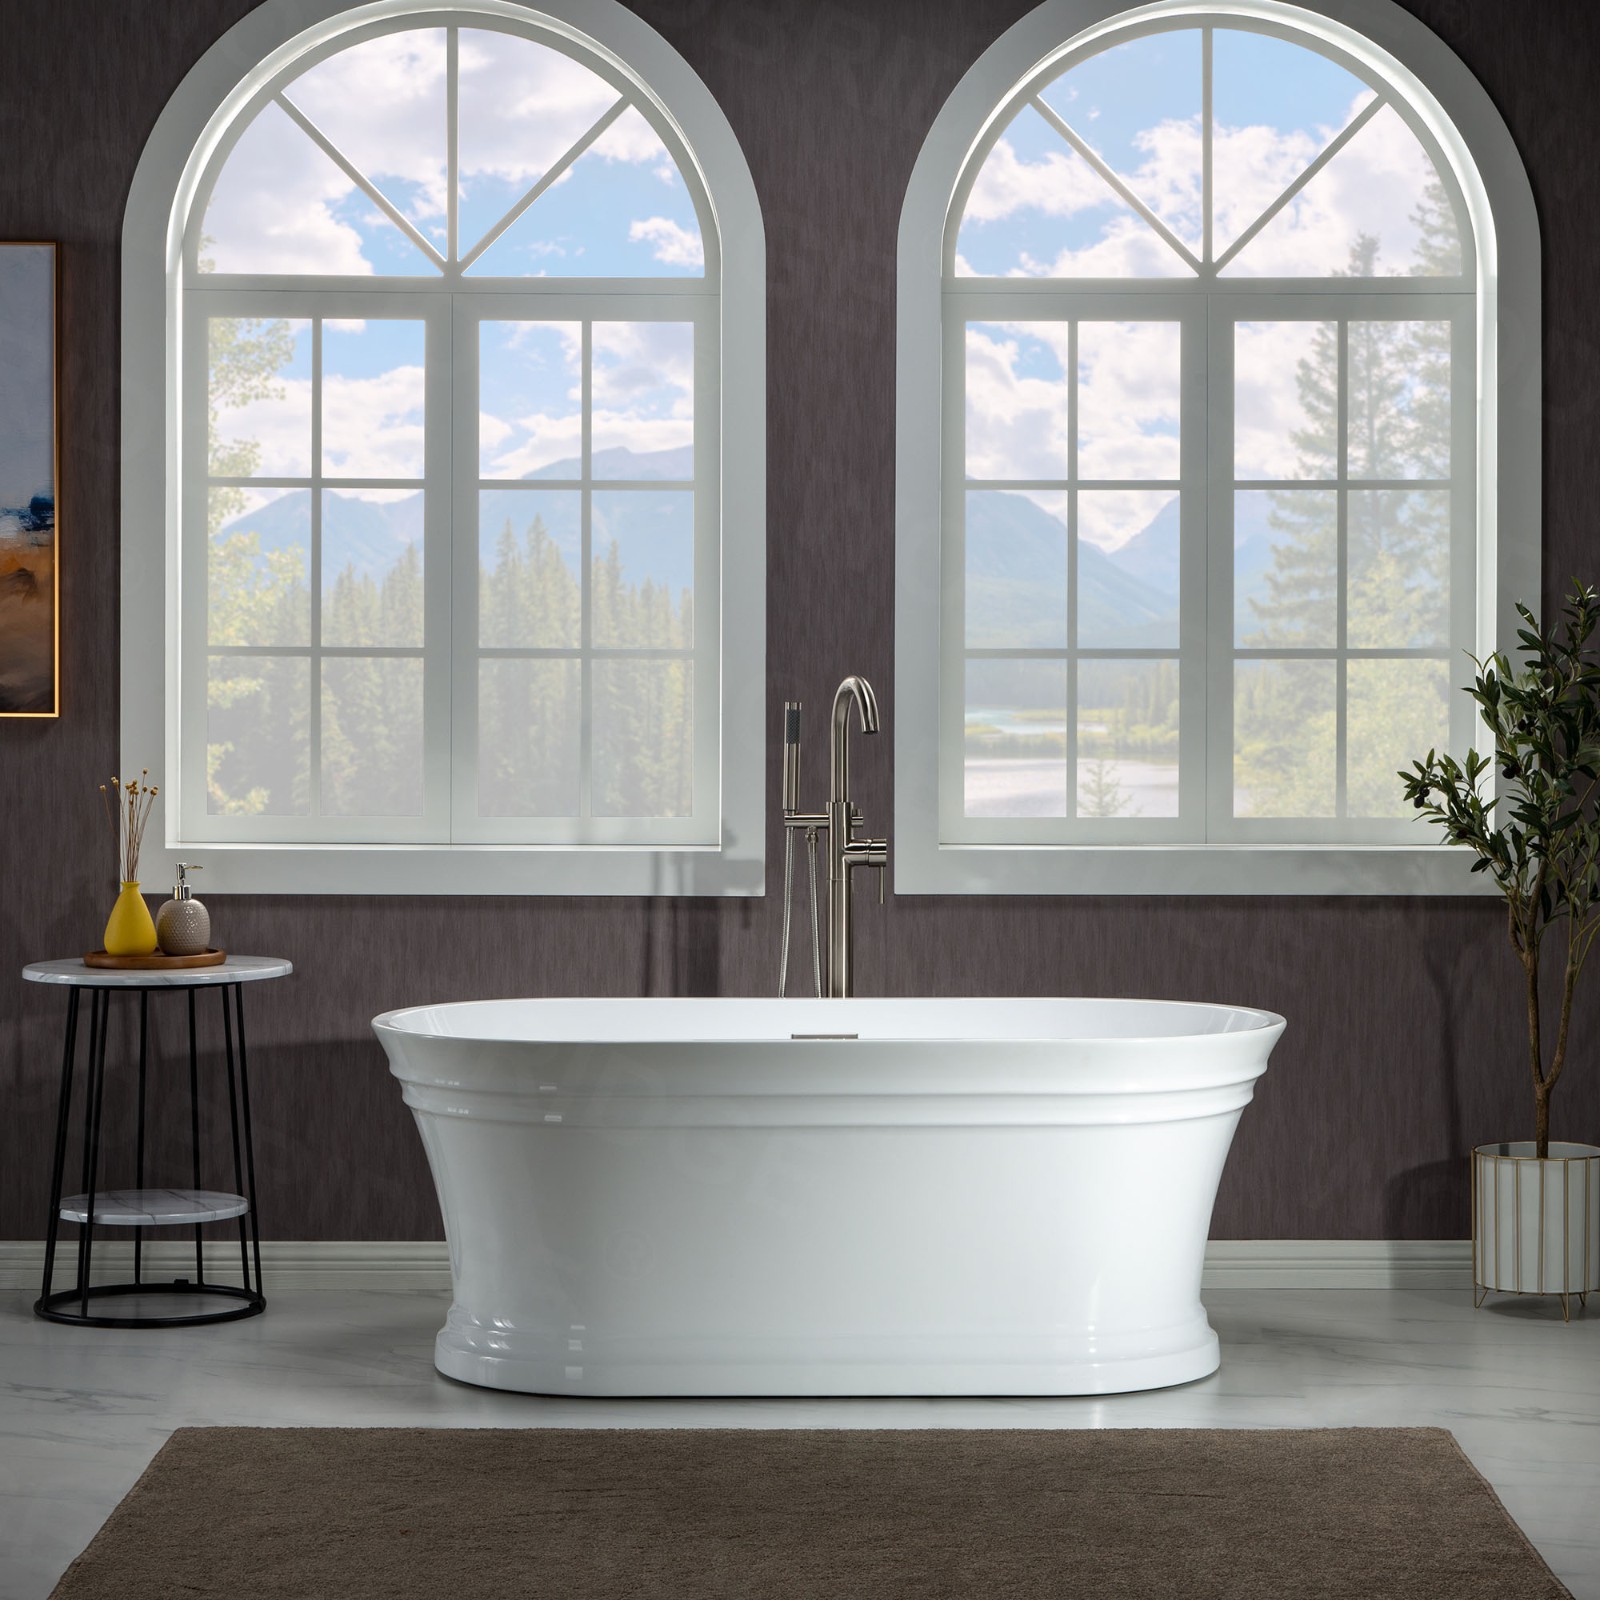  WOODBRIDGE 59 in. Freestanding Double Ended Acrylic Soaking Bathtub with Center Drain Assembly and Overflow, BTA1536/B1536, Glossy White_7847